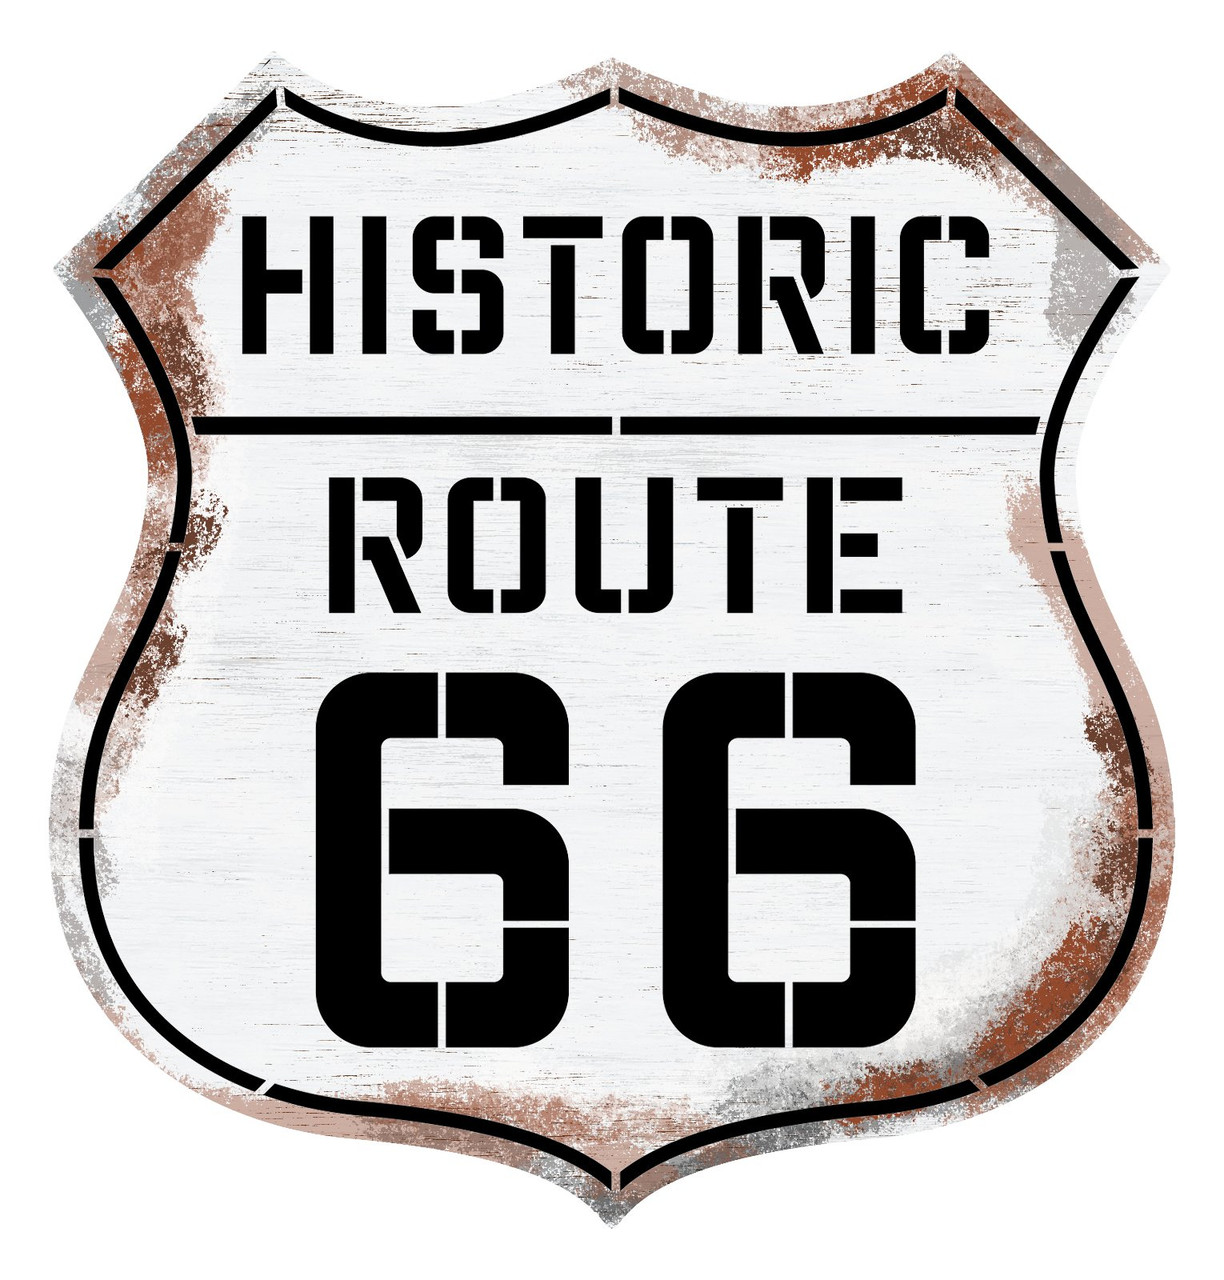 Historic Route 66 Sign Stencil by StudioR12 - Select Size - USA Made - Craft & Paint DIY Vintage Game Room Garage Wood Sign for Home Decor